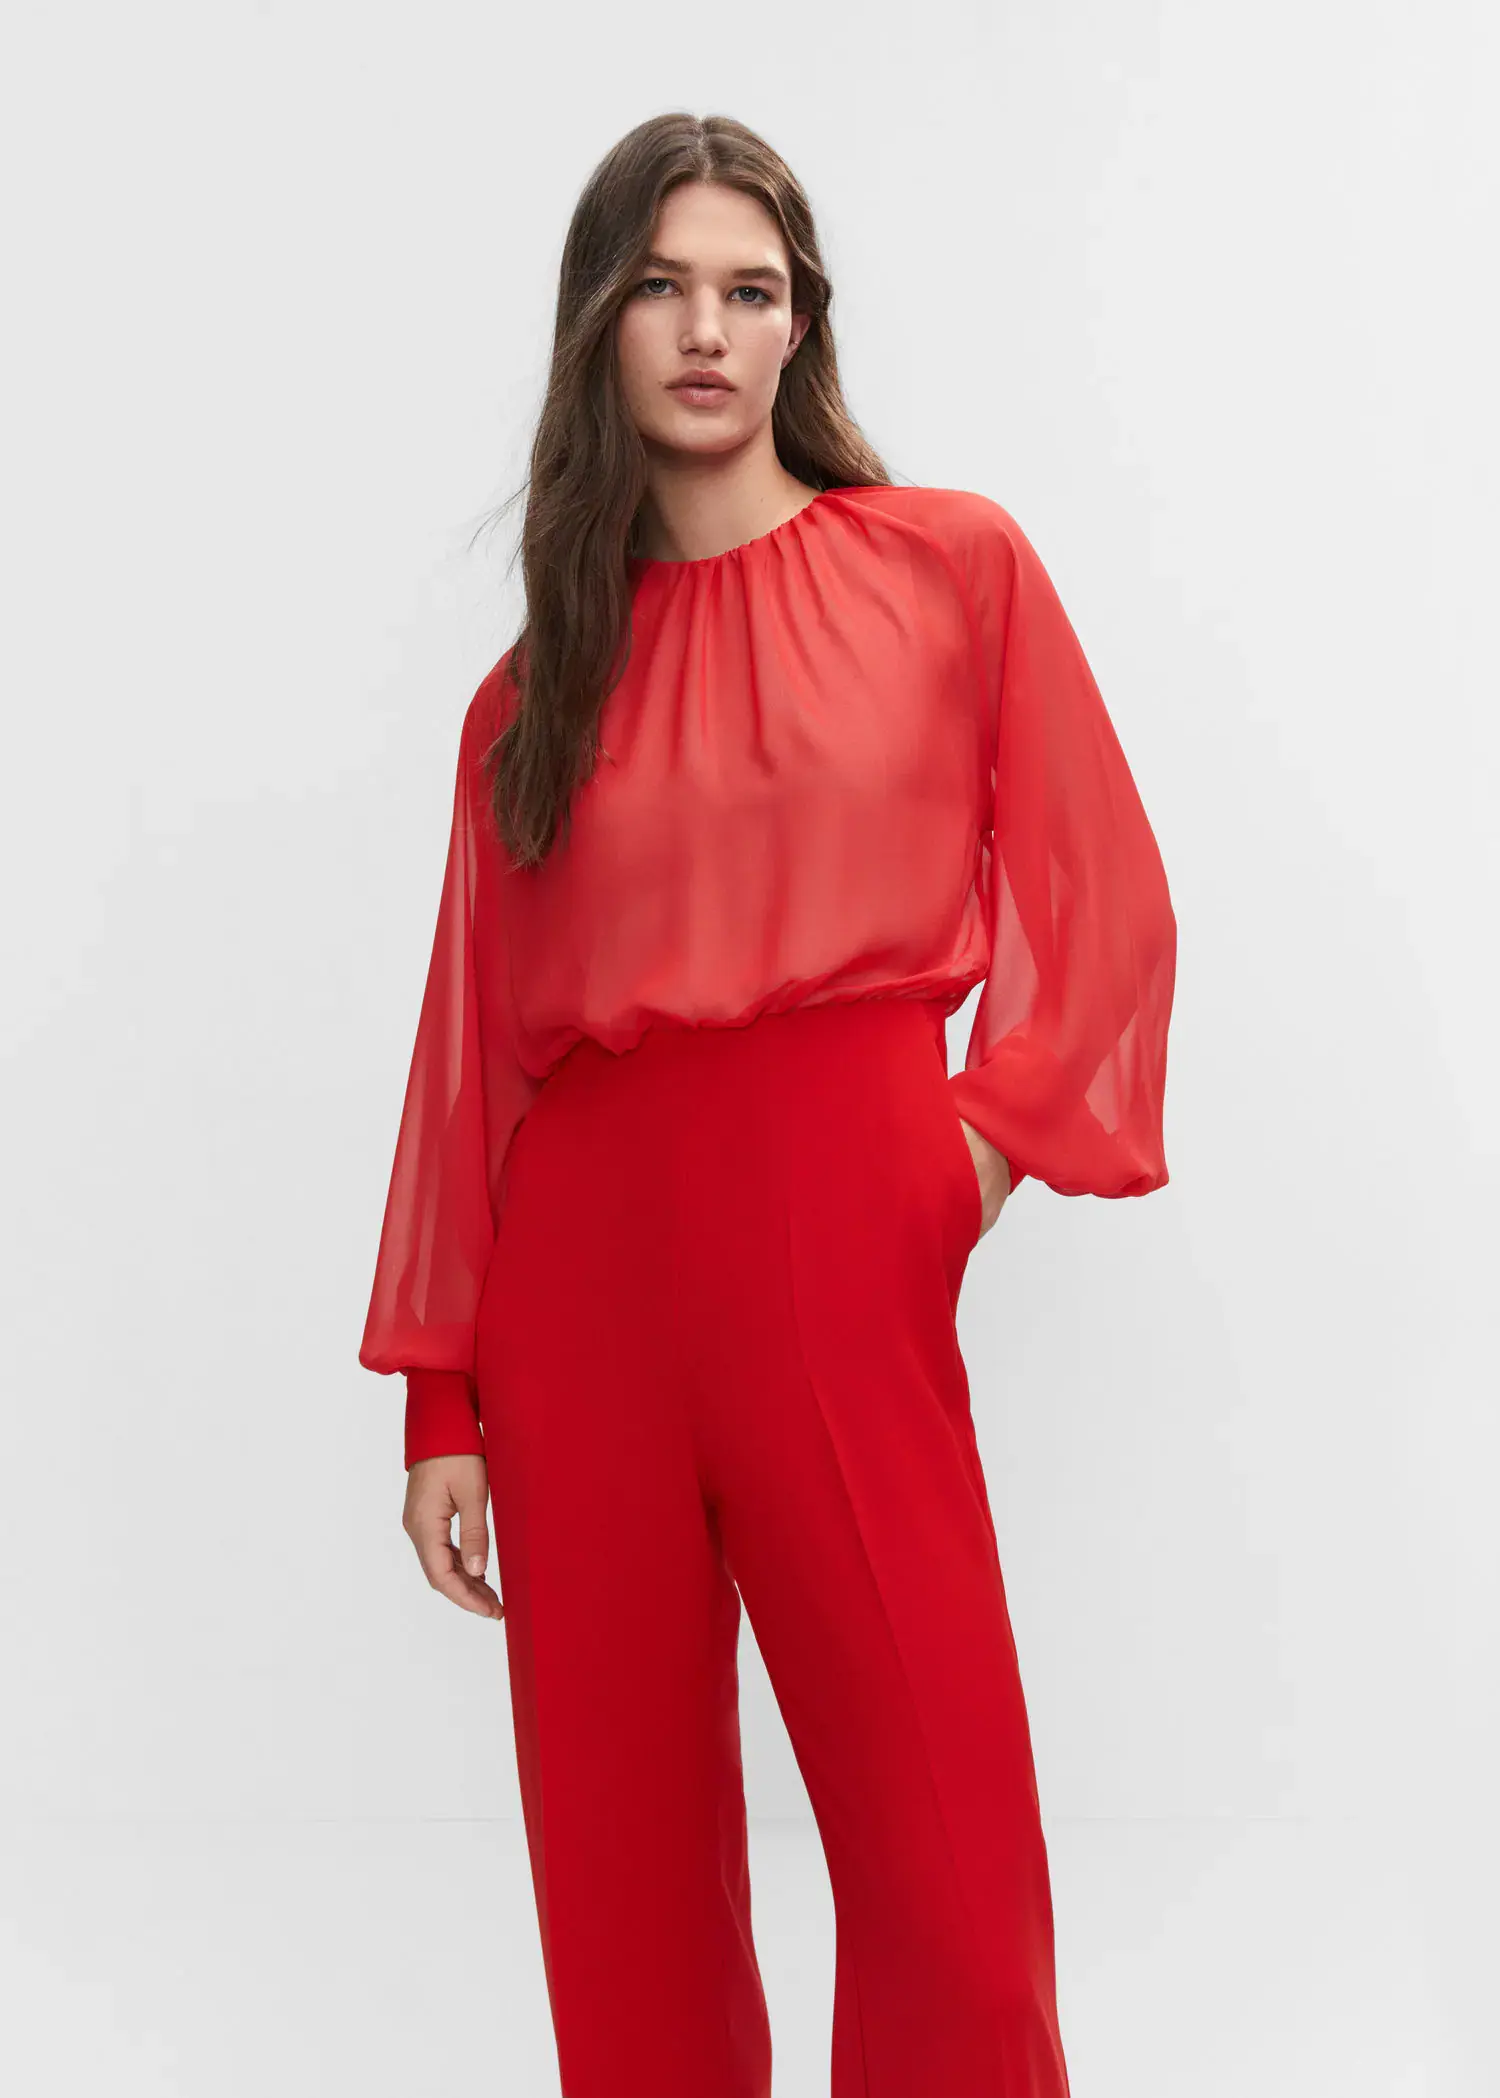 Mango Semi-transparent chiffon jumpsuit. a woman in a red outfit standing in front of a white wall. 